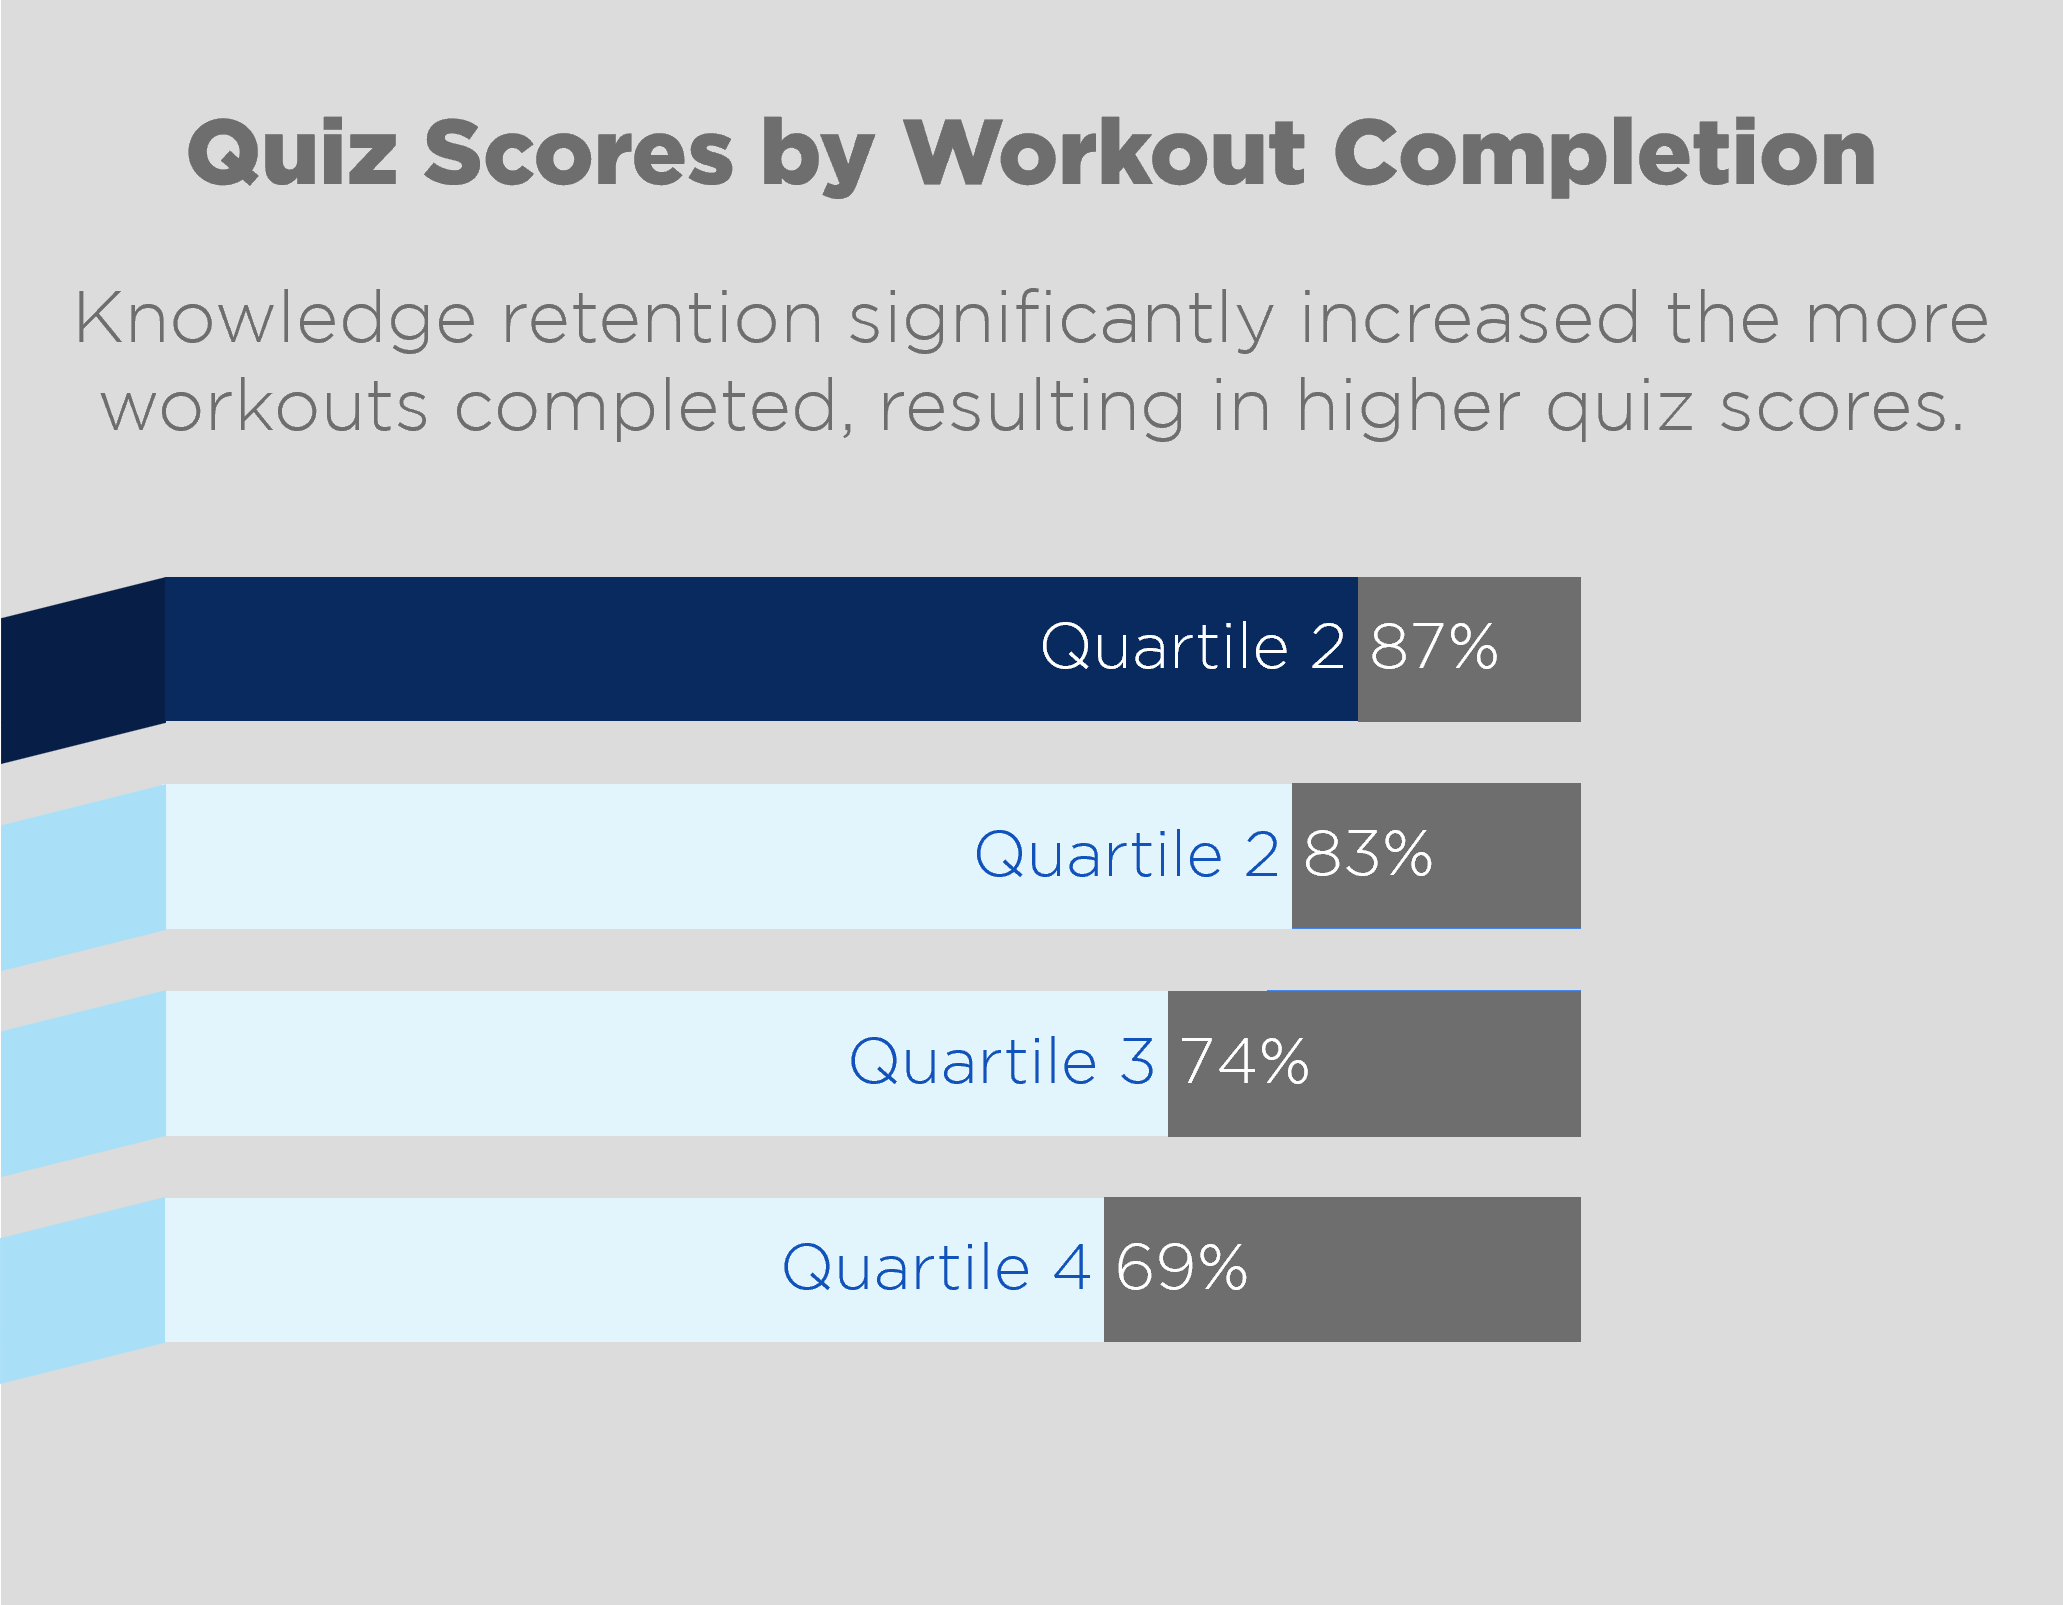 Chart for "Quiz Scores by Workout Completion" "Knowledge retention significantly increased the more workouts completed, resulting in higher quiz score." receiving 87% in Quartile 2